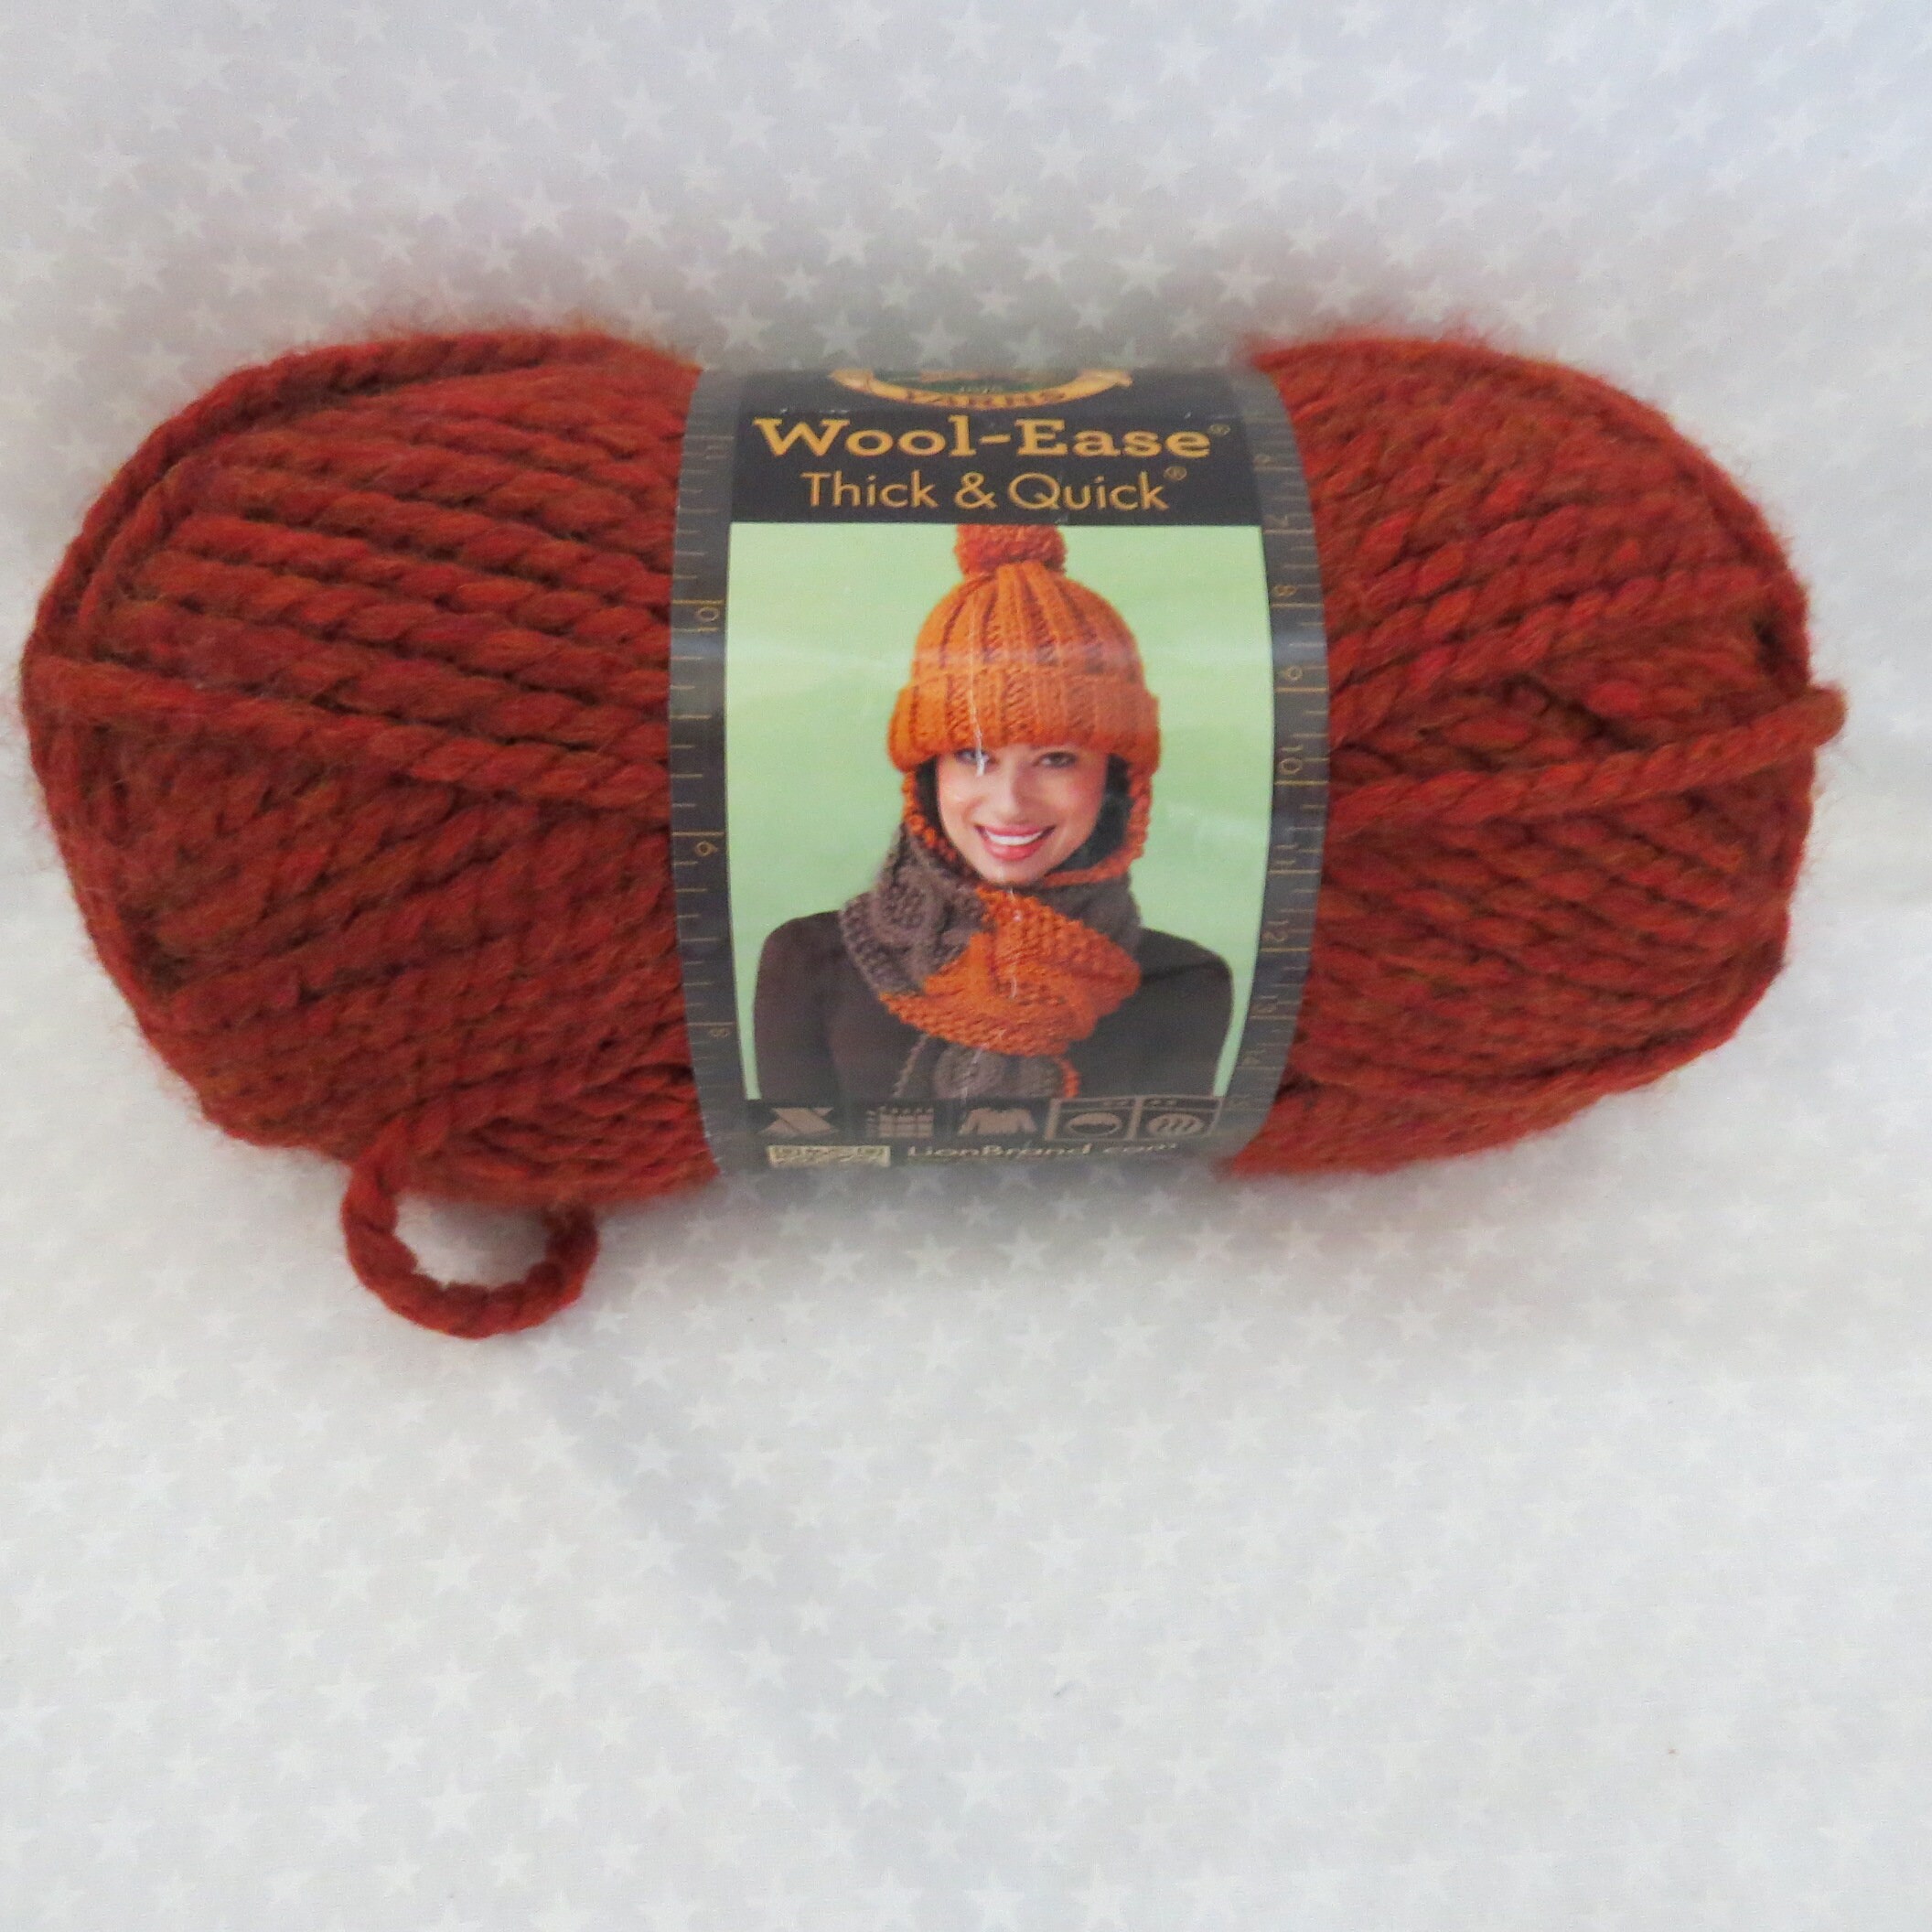 Lion Brand Wool Ease Thick & Quick Yarn - Fossil